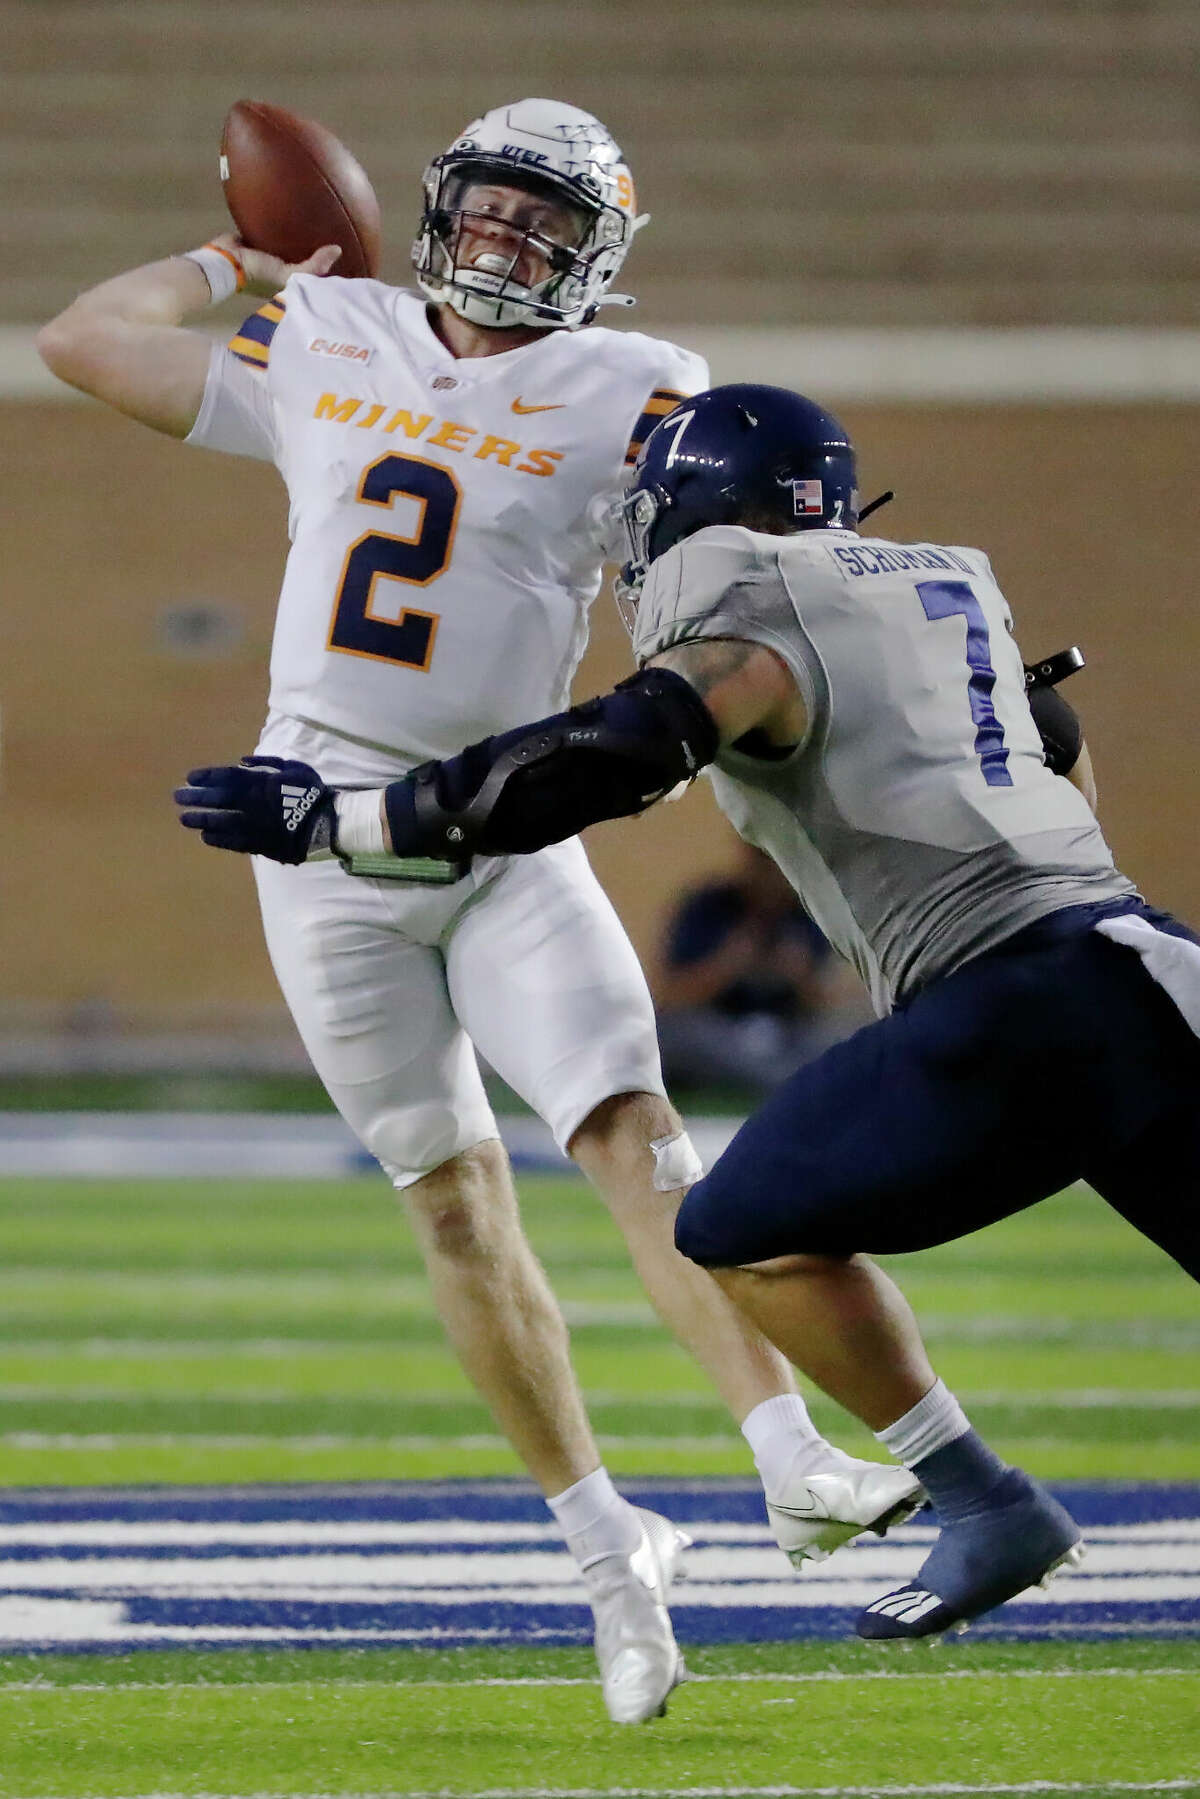 UTEP quarterback Gavin Hardison (2) passes the ball while under pressure from Rice defensive end Trey Schuman (7) during the first half of an NCAA college football game Thursday, Nov. 3, 2022, in Houston. (AP Photo/Michael Wyke)